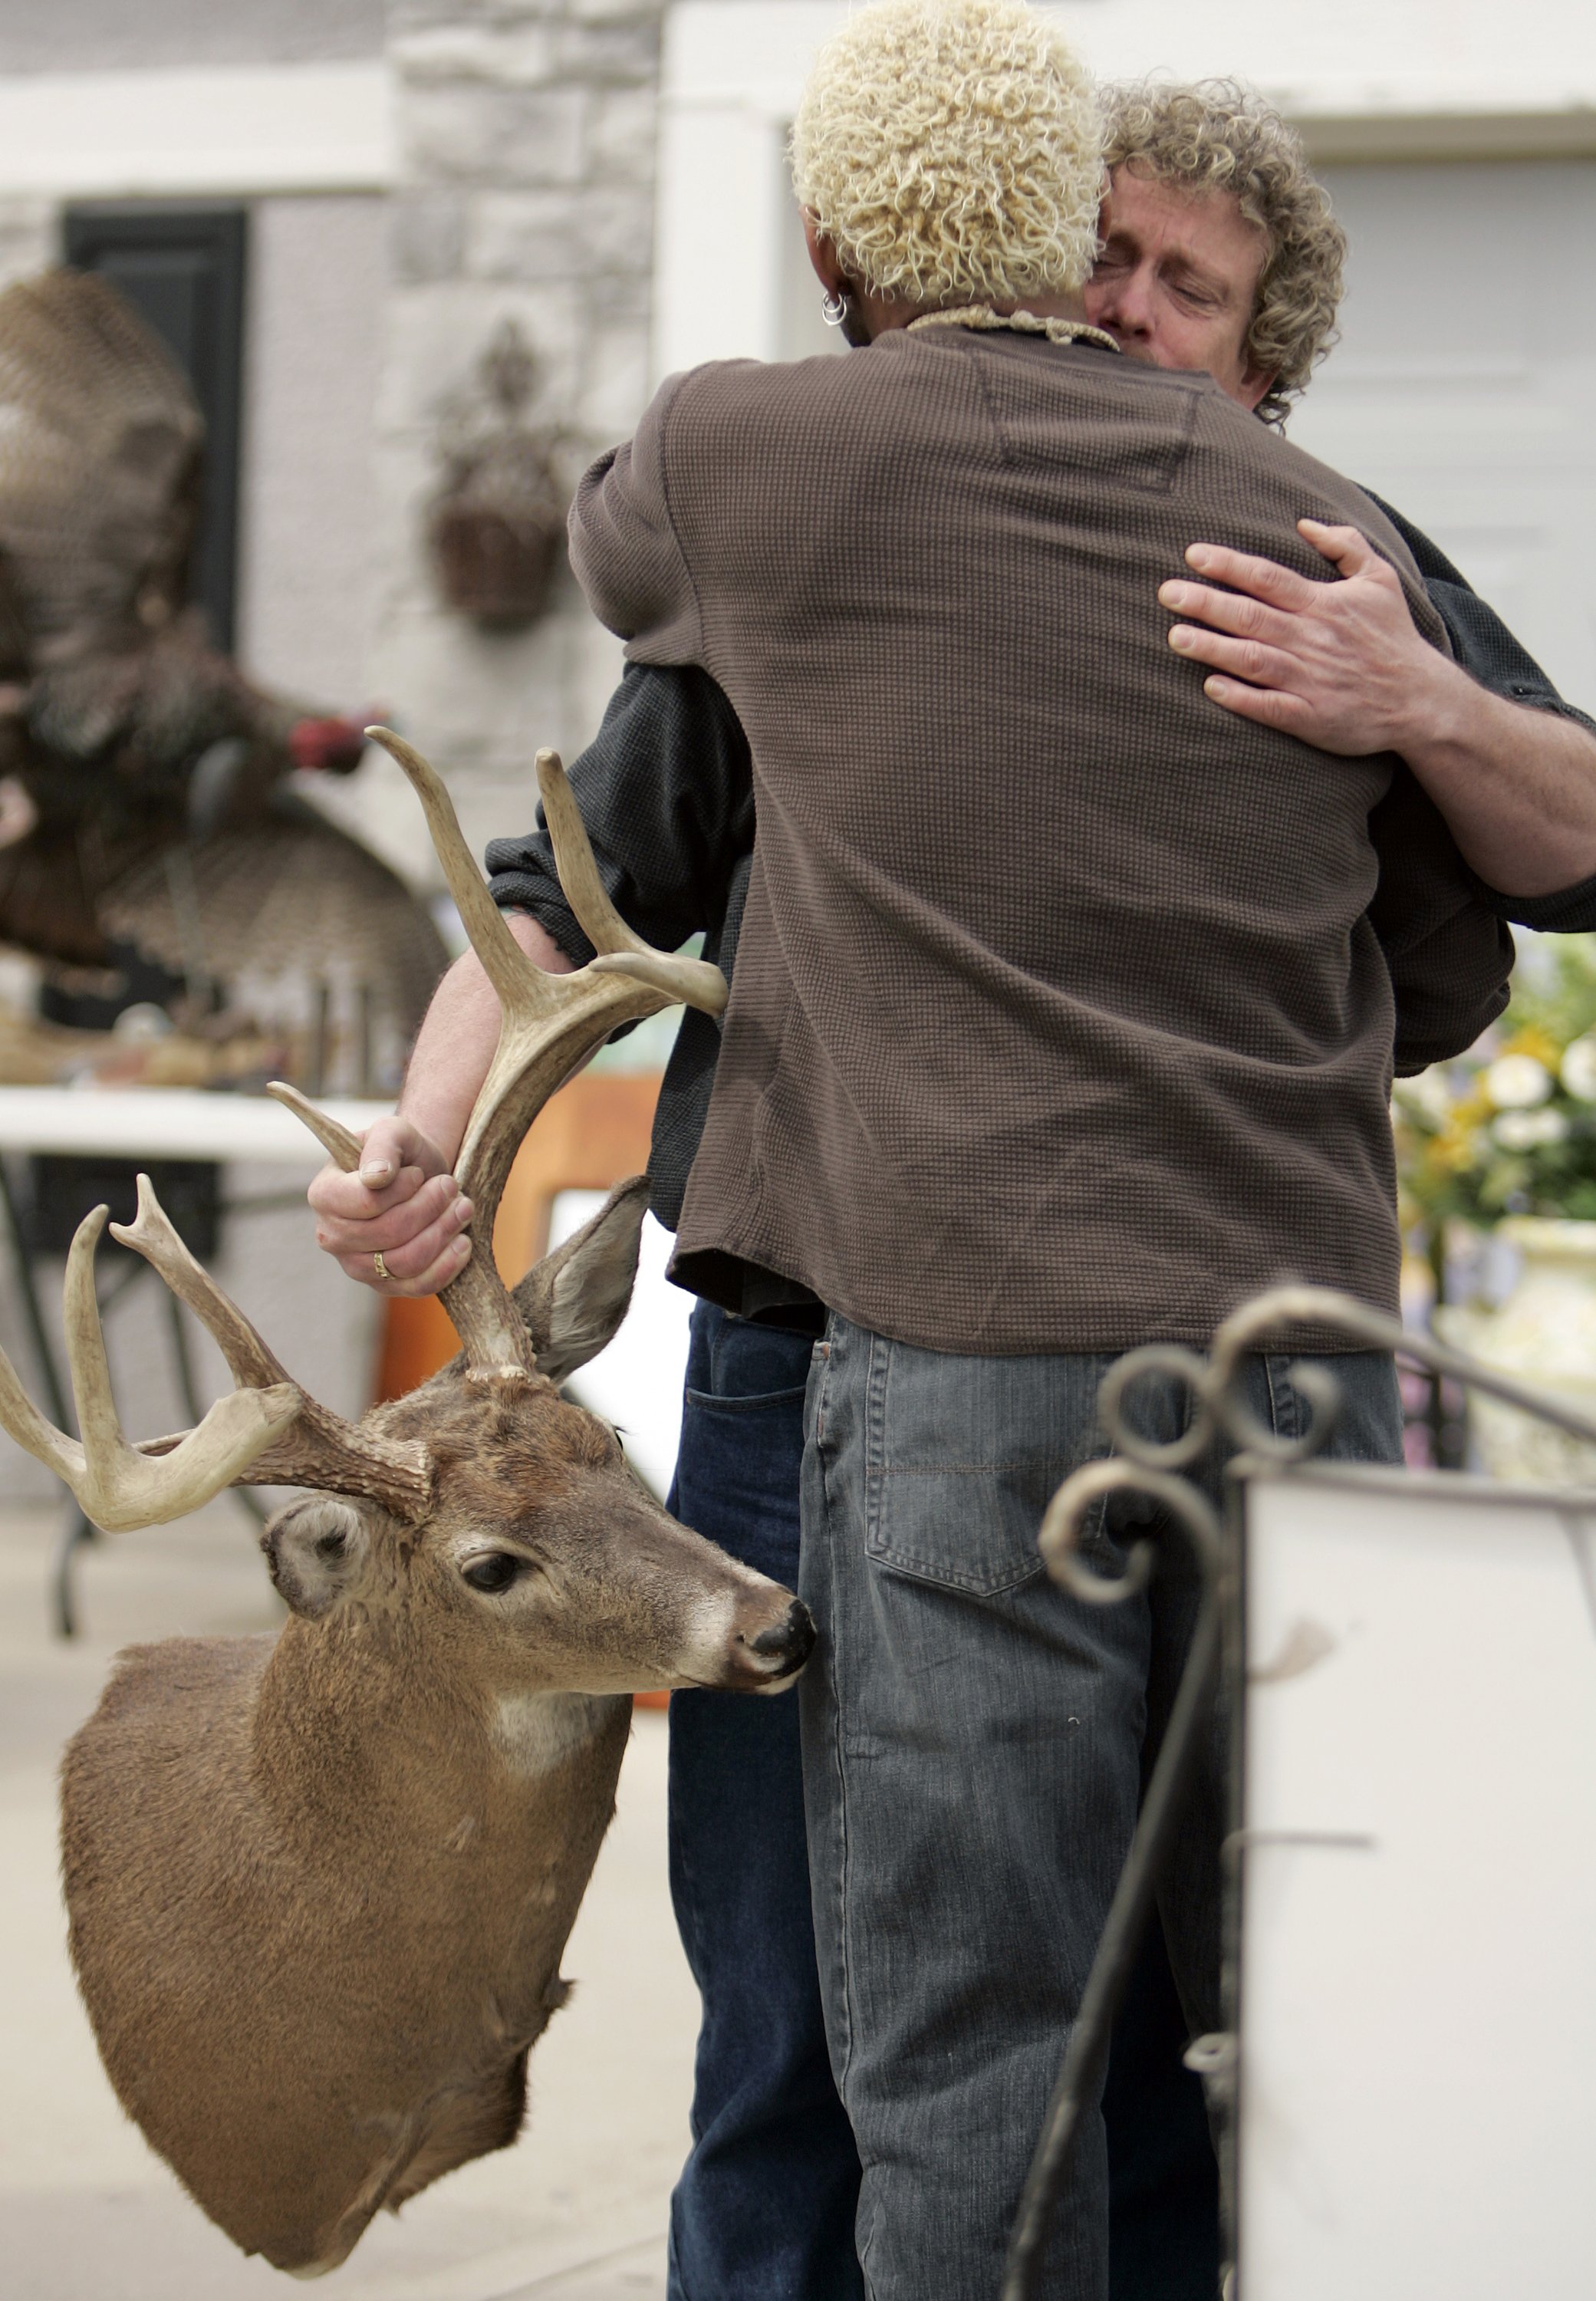 Willie Aames gets a hug at the start of his garage sale in Olathe, Kansas, on Thursday, March 26, 2009. | Source: Getty Images